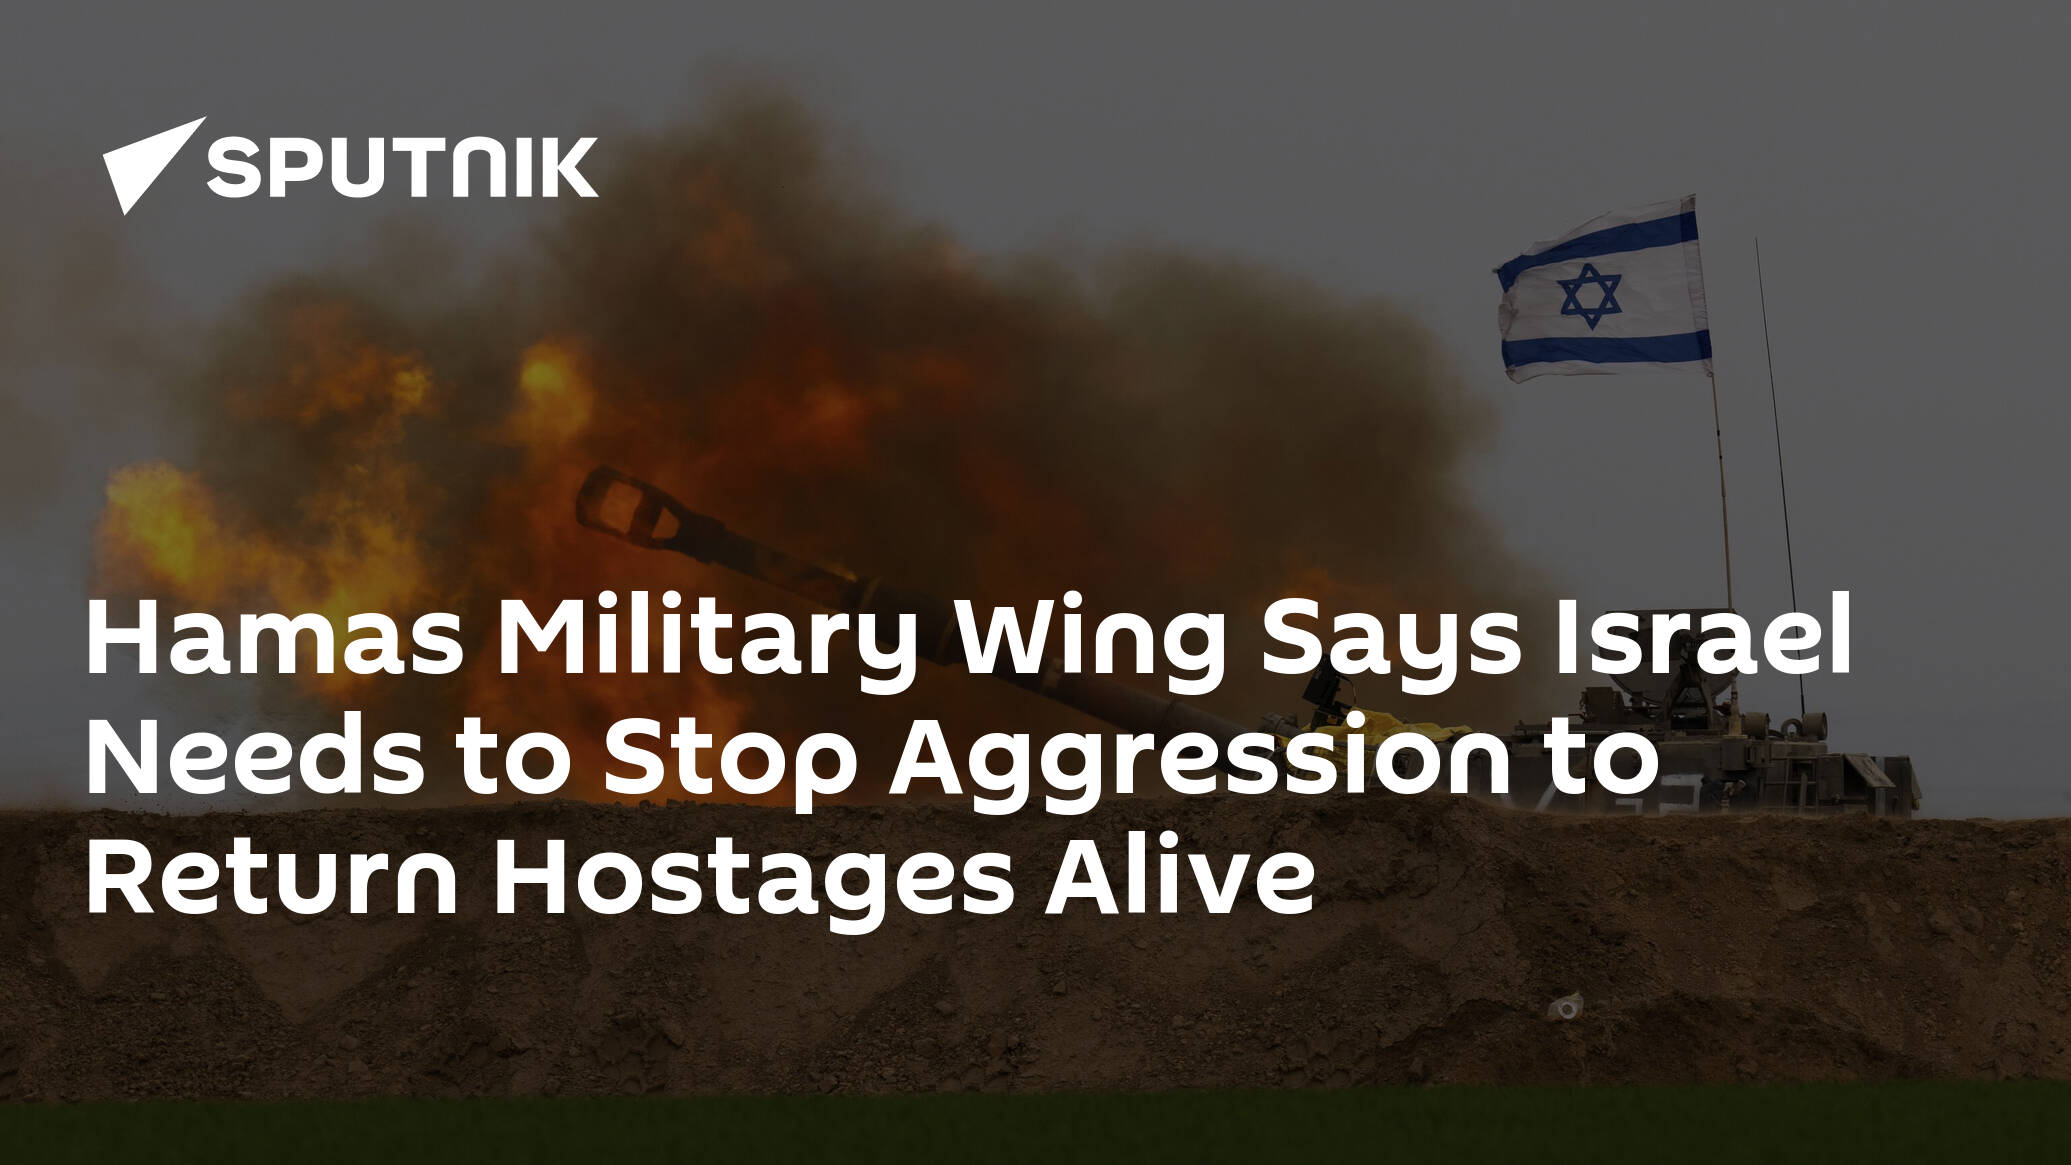 Hamas Military Wing Says Israel Needs to Stop Aggression to Return Hostages Alive